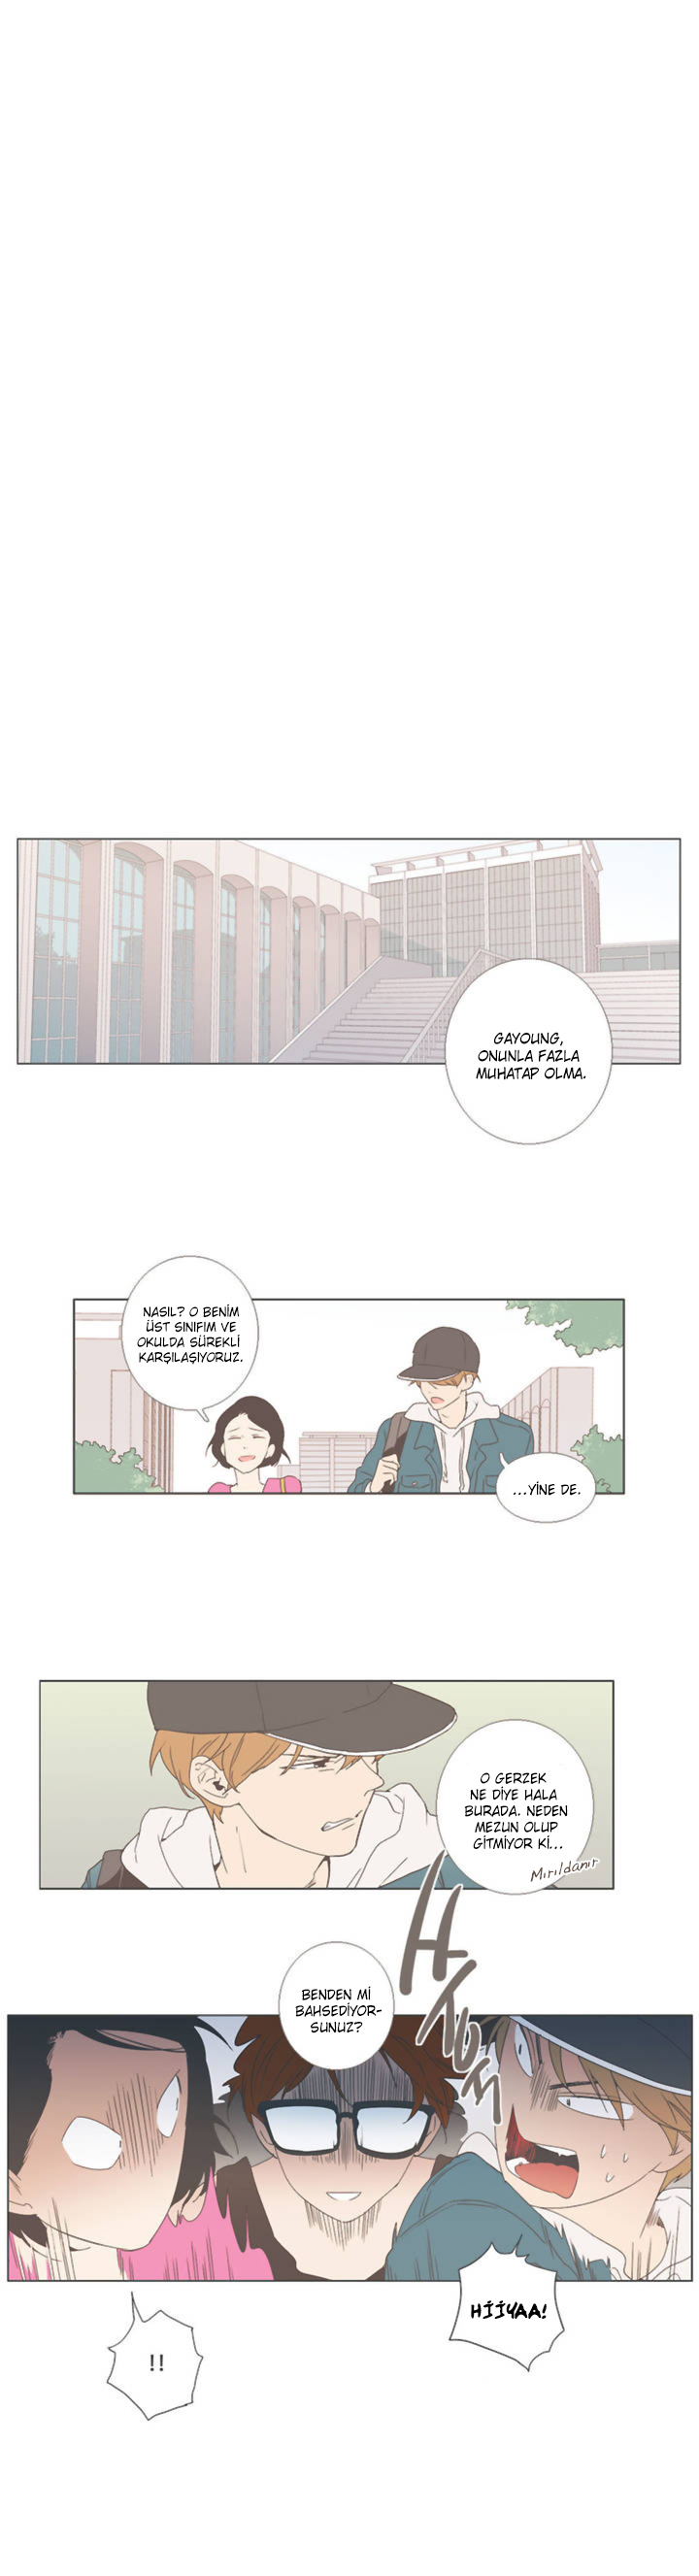 Something About Us: Chapter 05 - Page 2